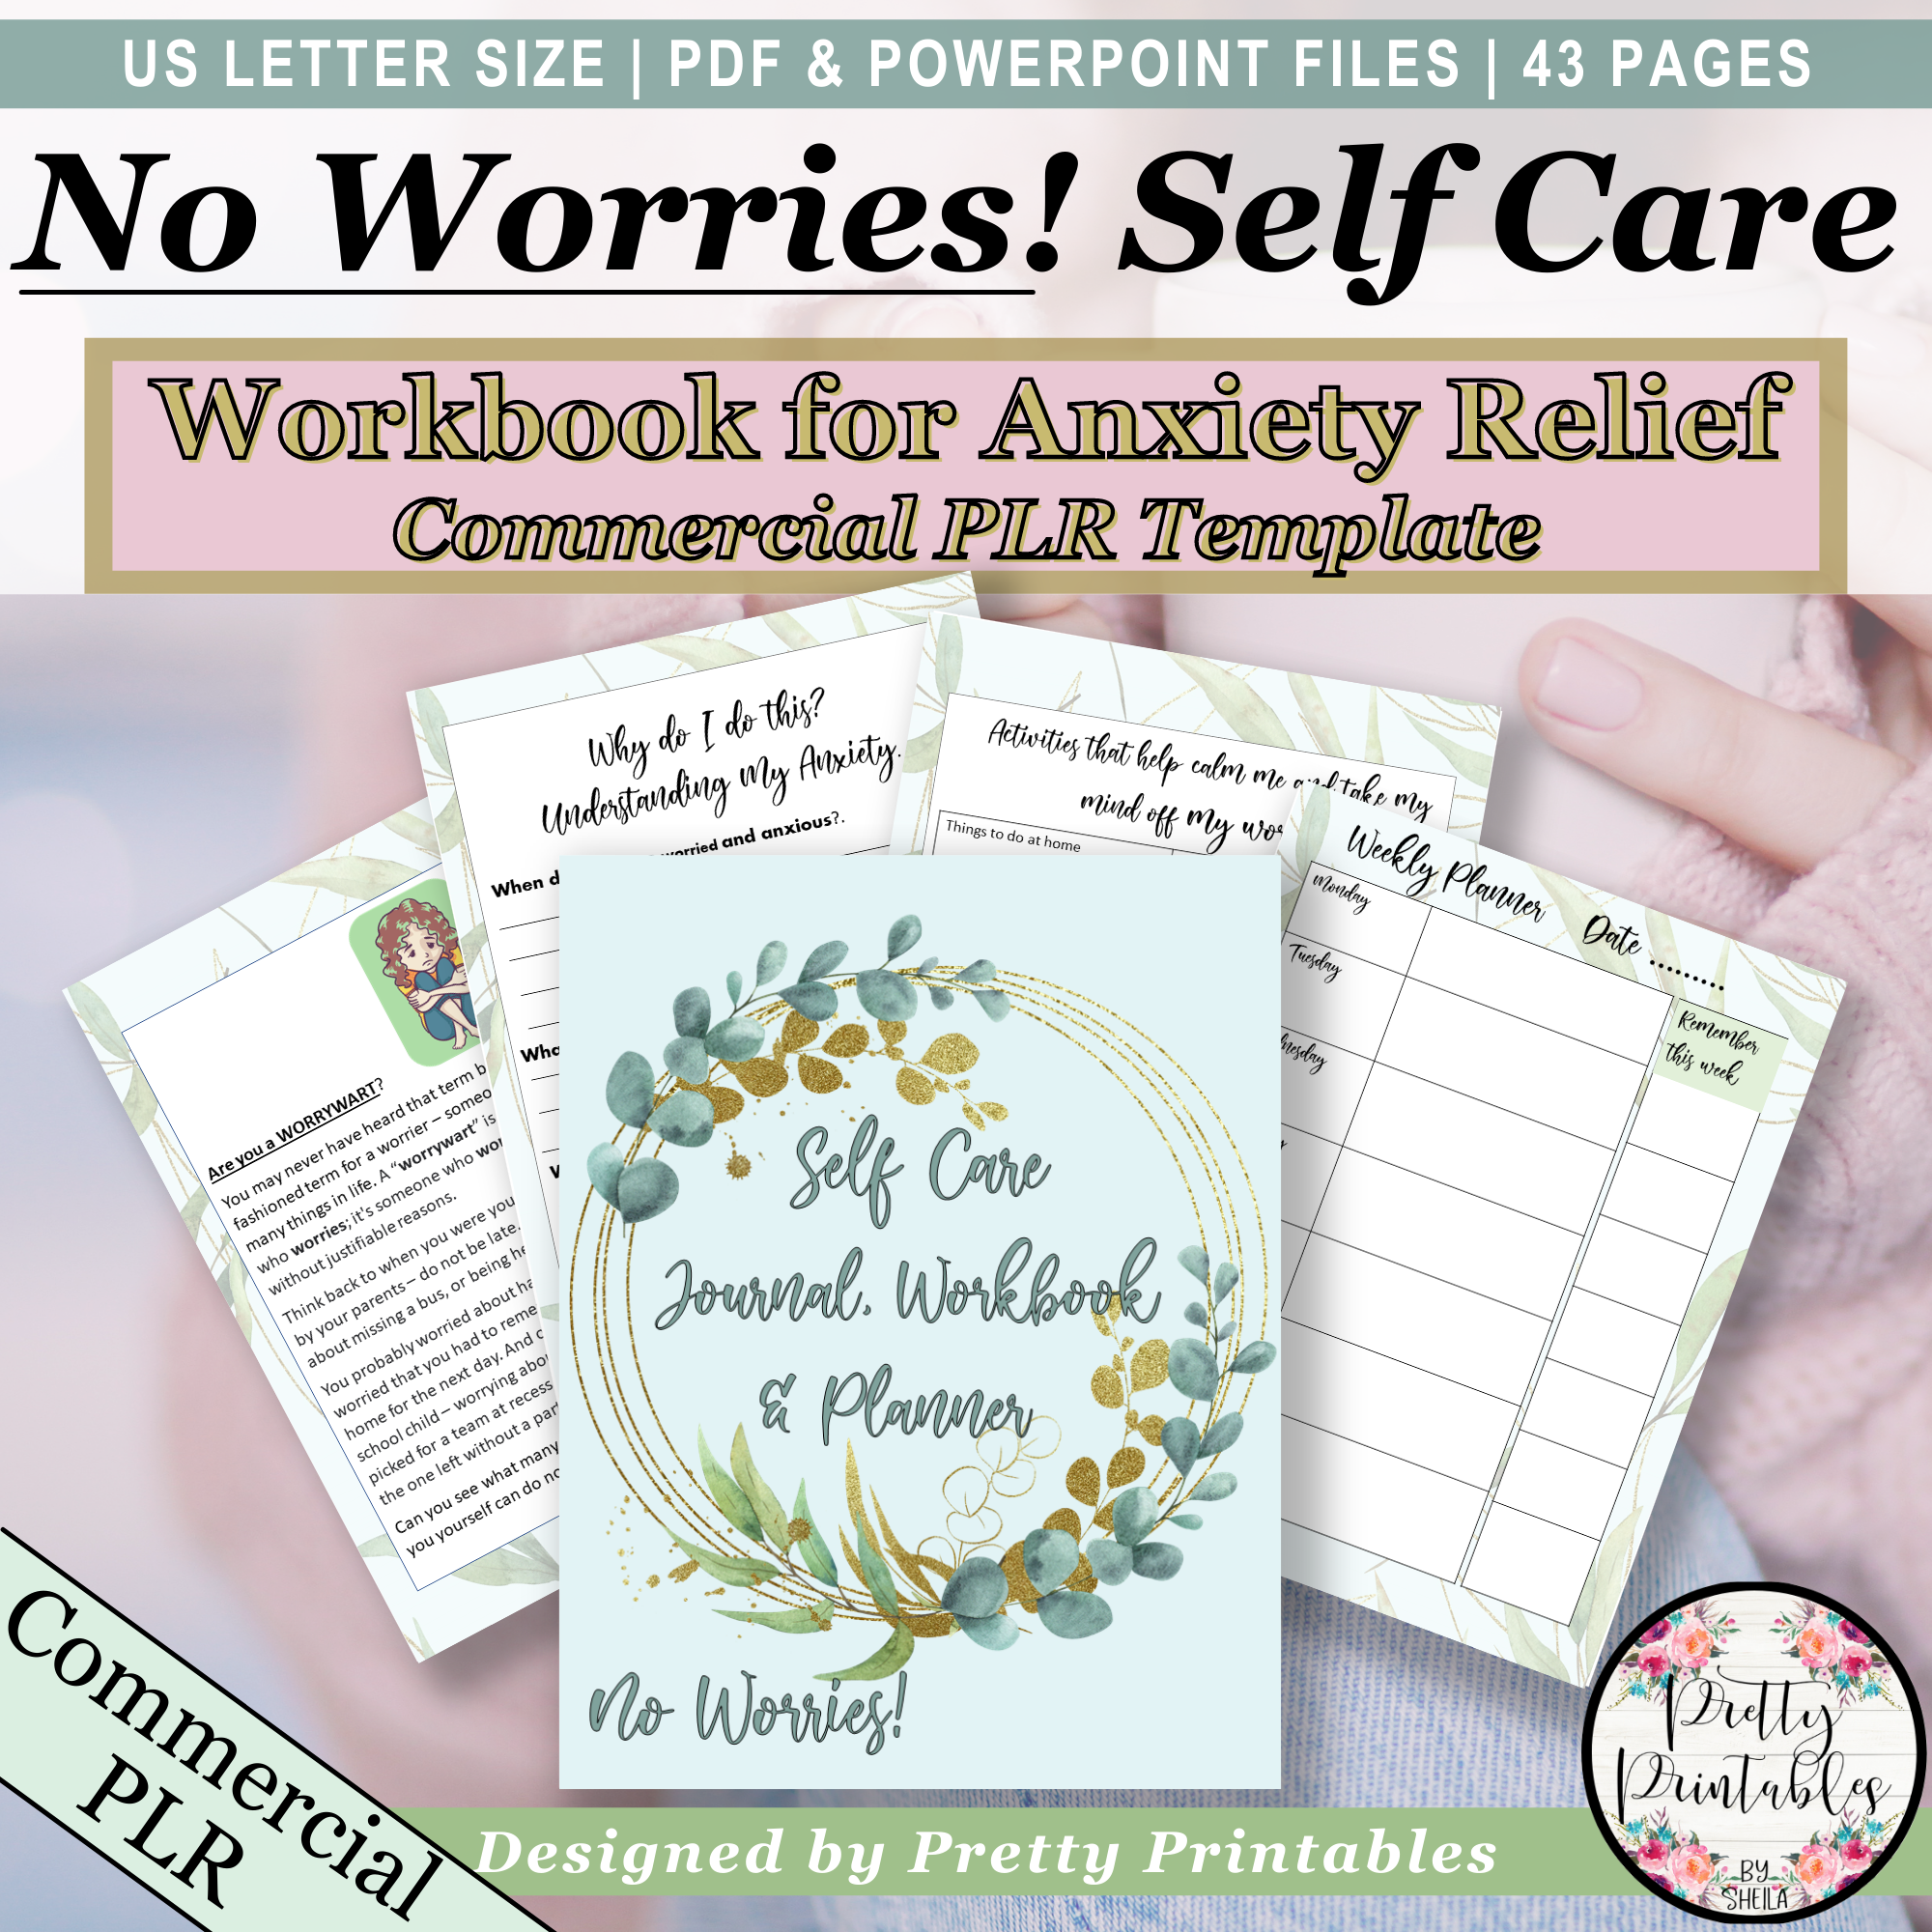 No Worries Self Care Workbook for Anxiety Relief Commercial PLR Template